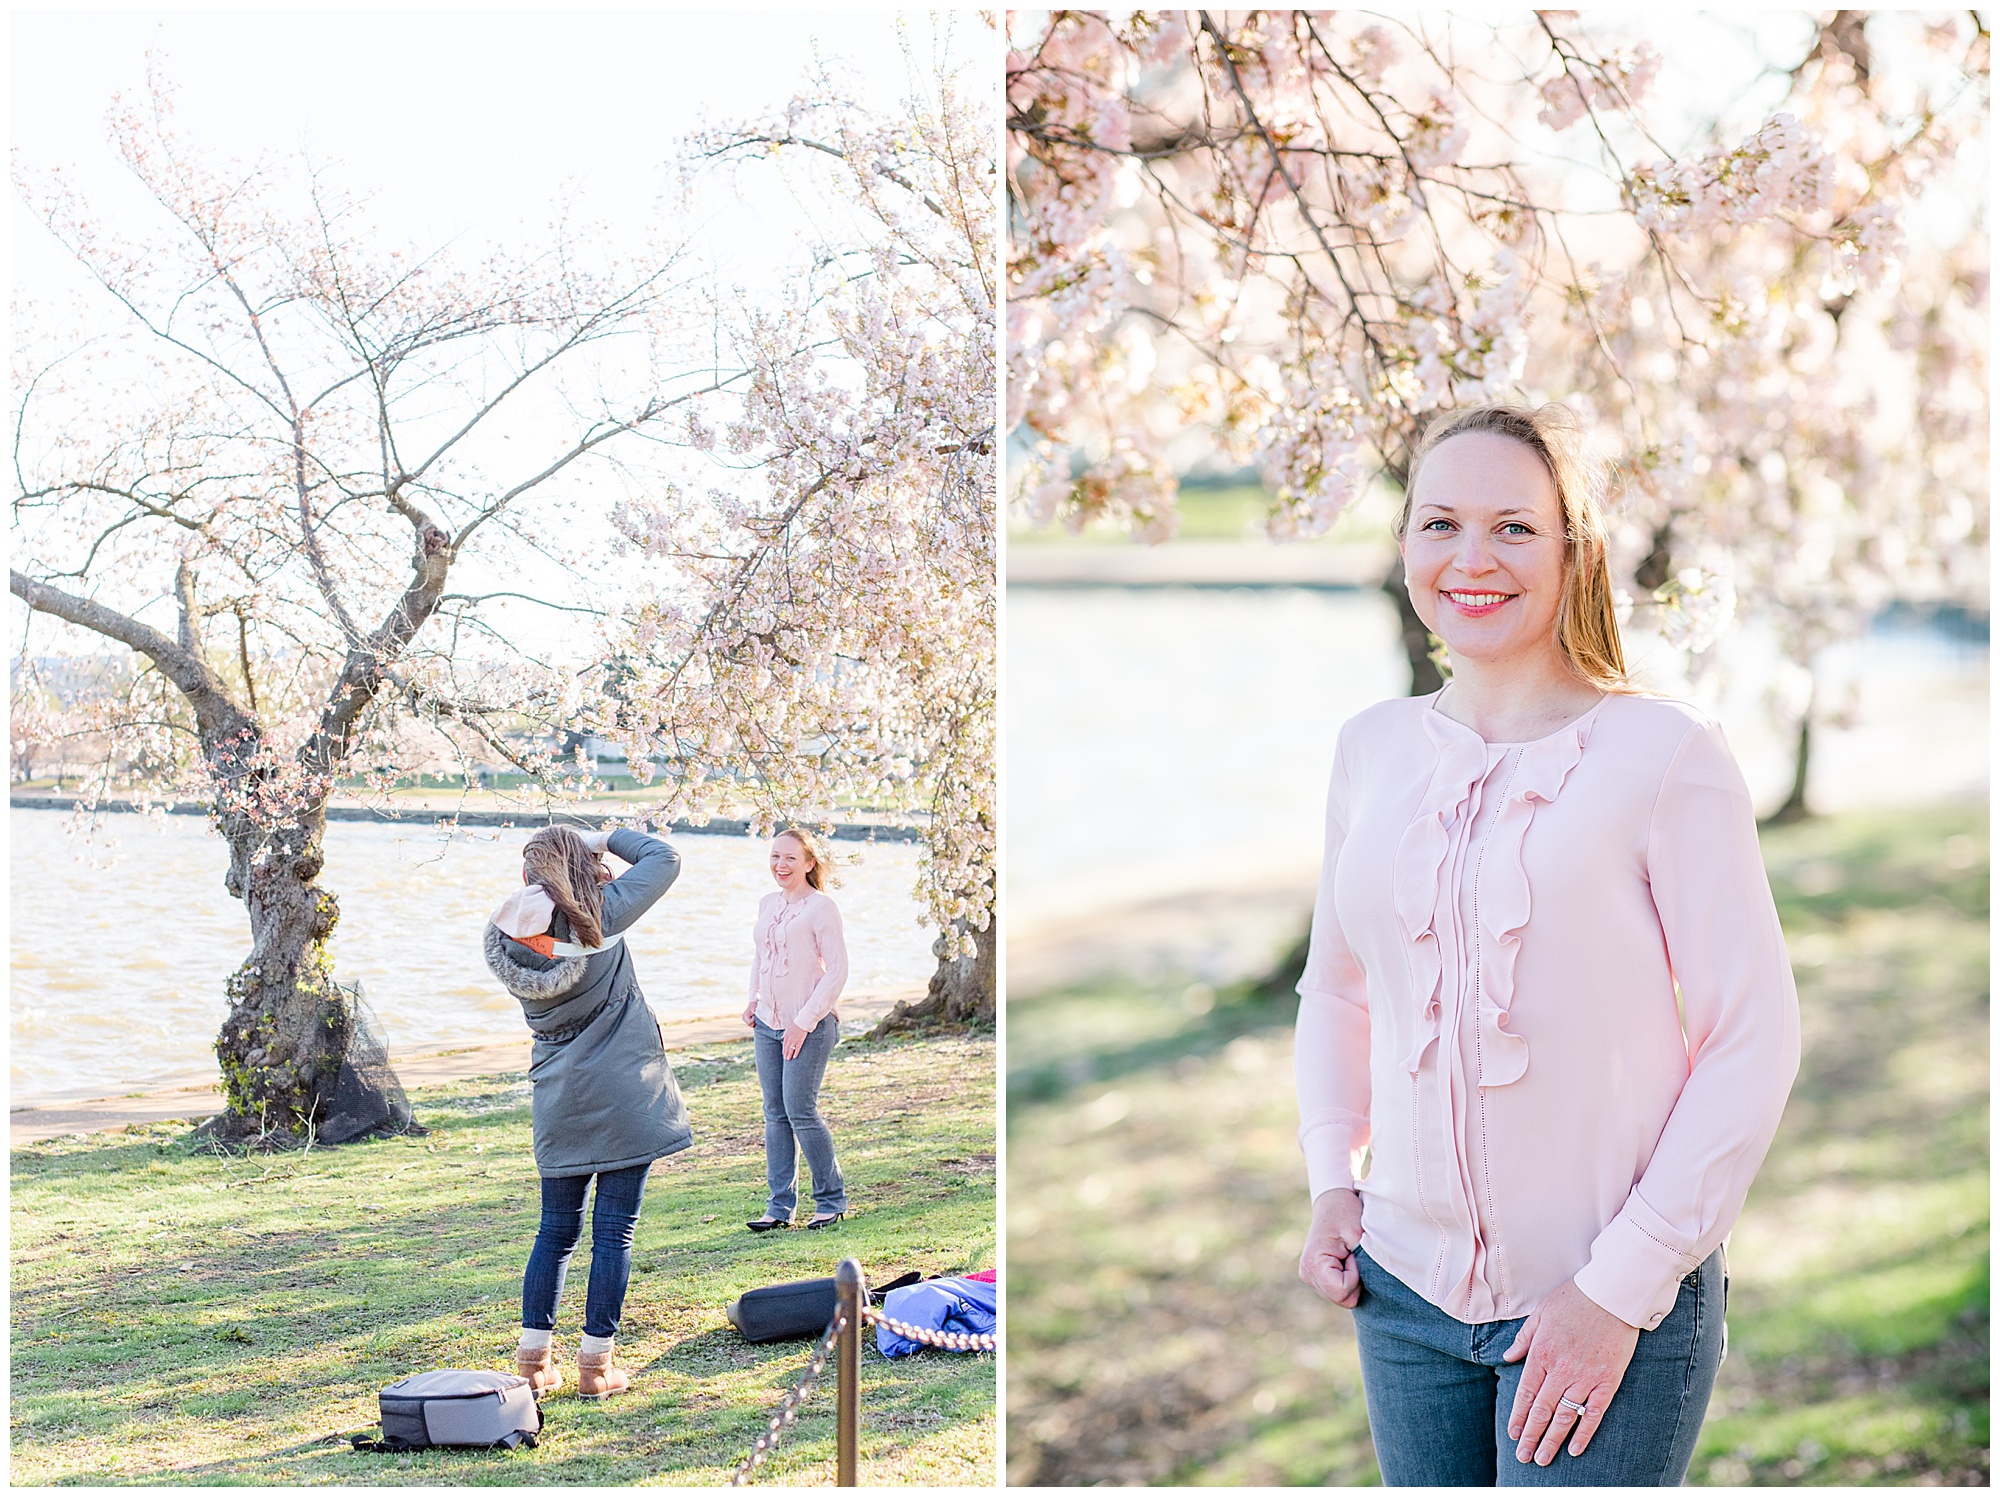 how to prepare for cherry blossoms photos, tips for cherry blossoms season, DC cherry blossoms photography, DC cherry blossoms photographer, photo session tips, cherry blossoms photos tips, DC cherry blossoms, Rachel E.H. Photography, cherry blossoms headshots